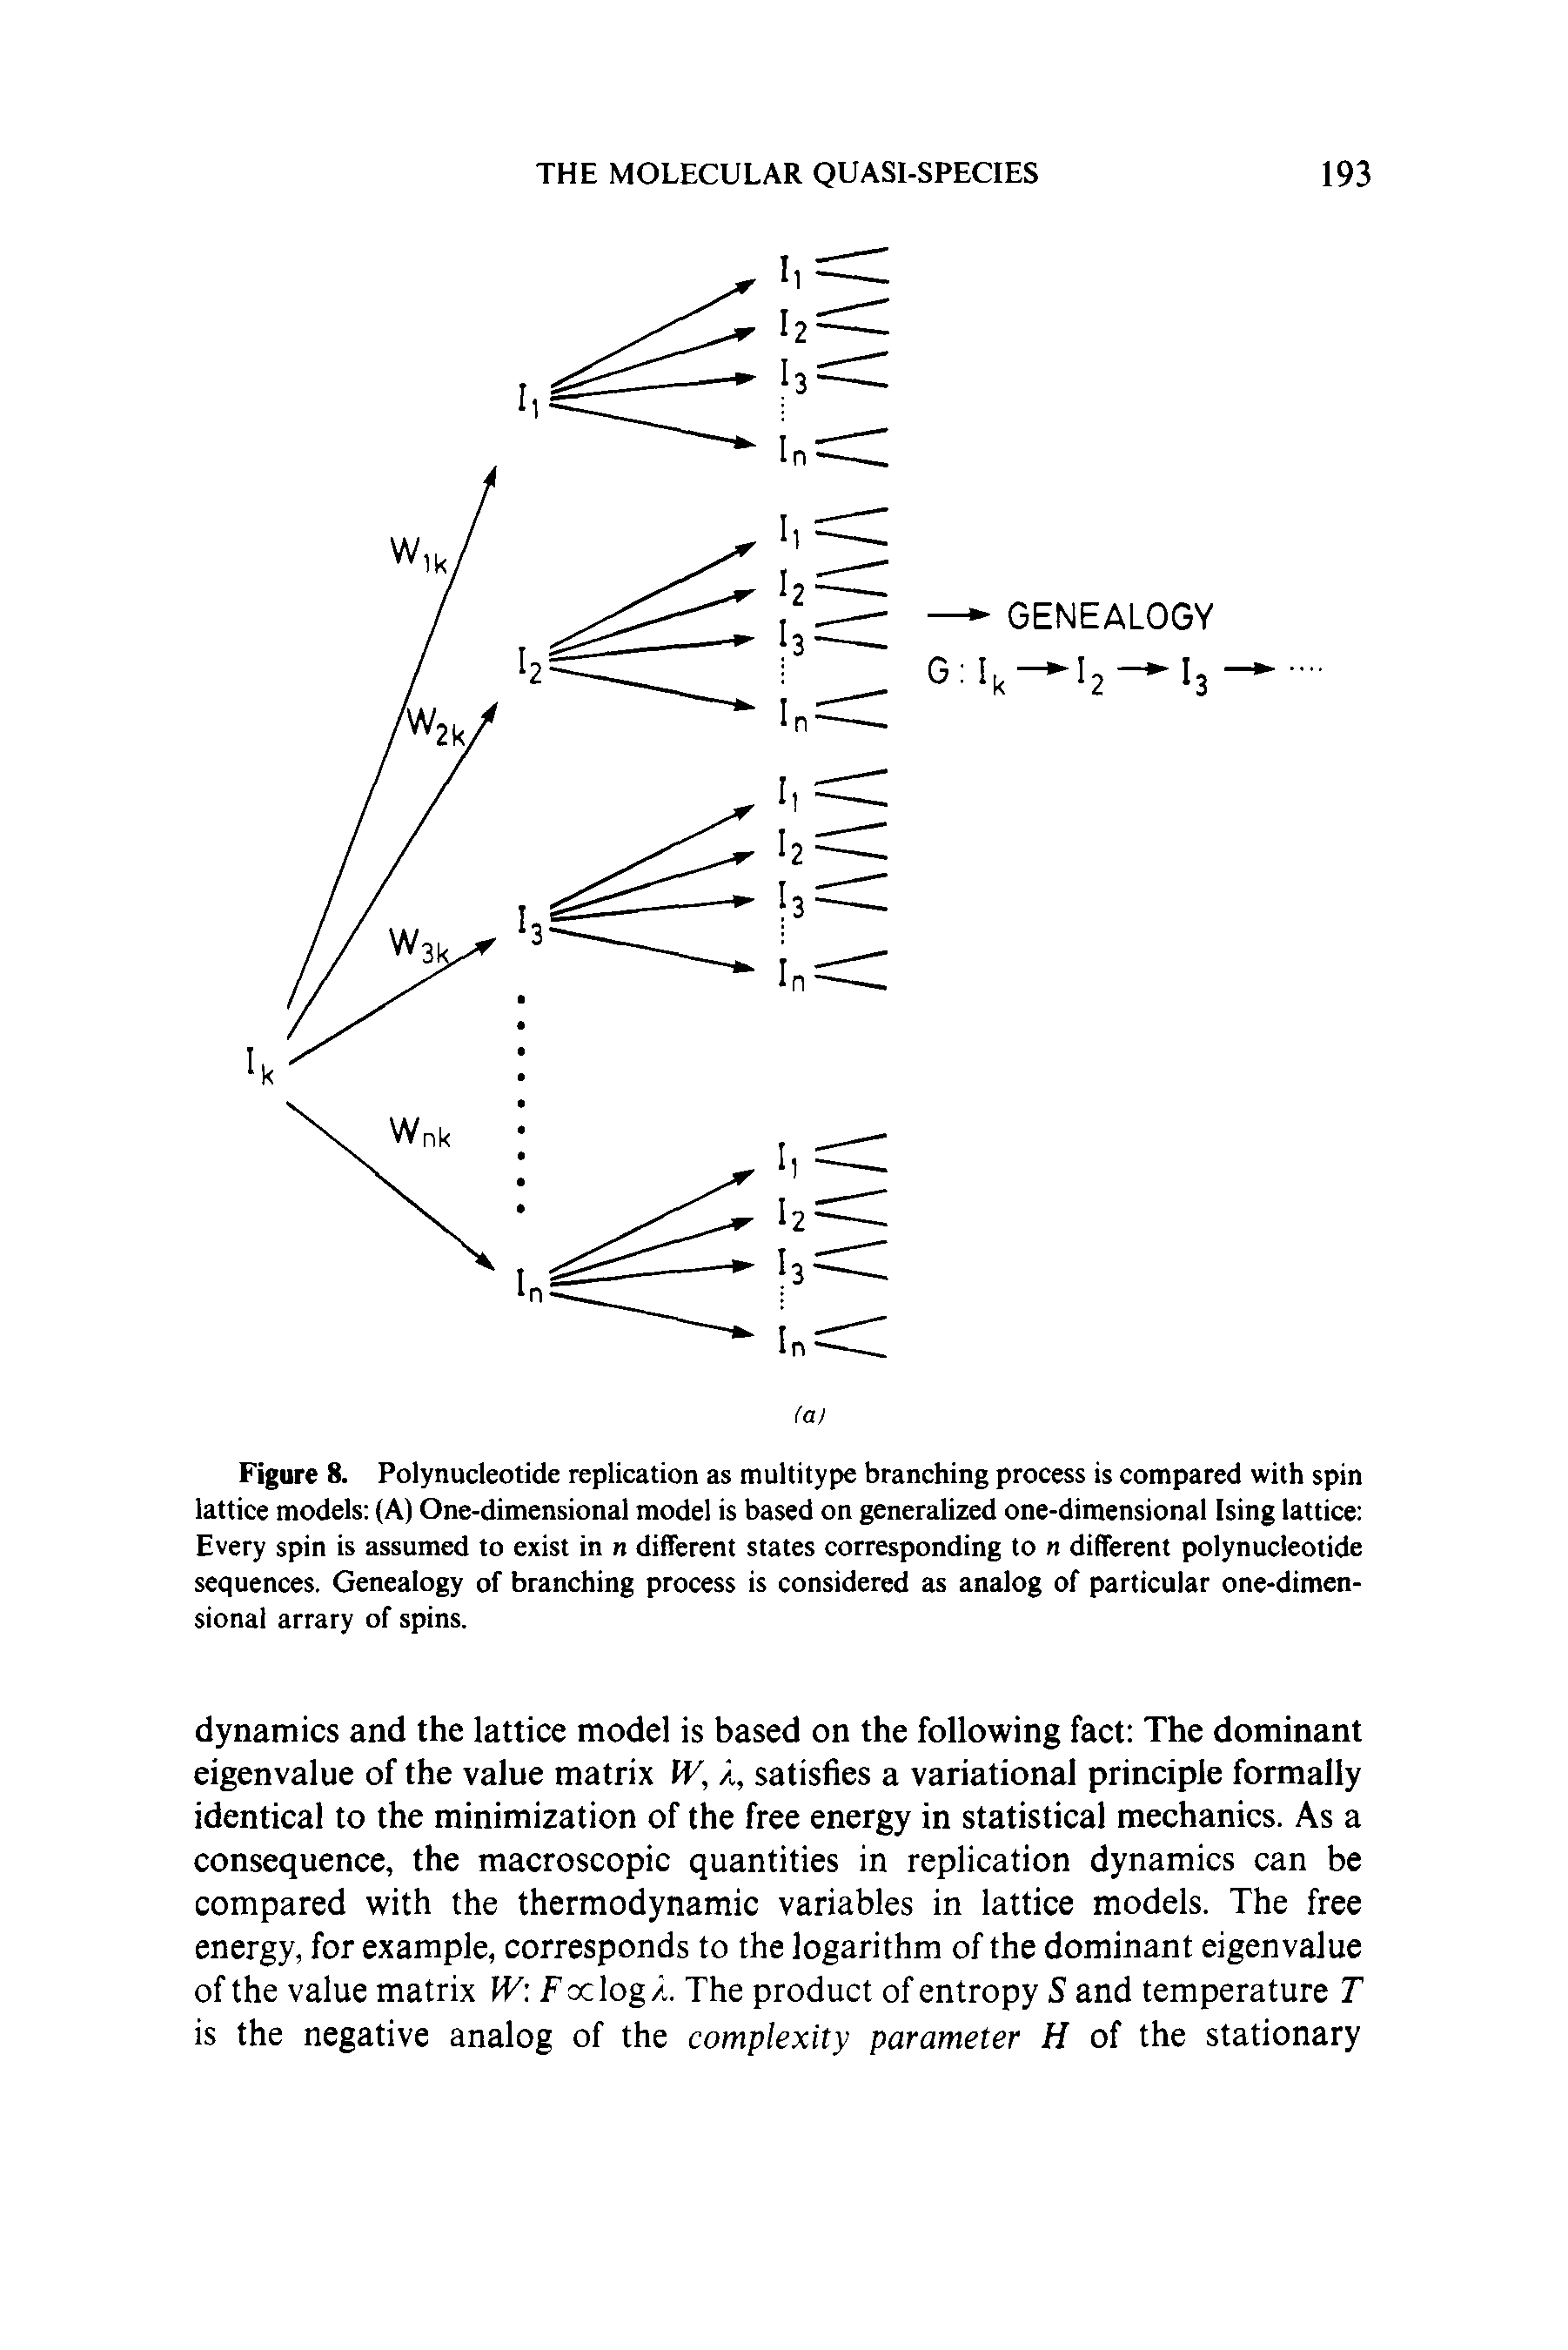 Figure 8. Polynucleotide replication as multitype branching process is compared with spin lattice models (A) One-dimensional model is based on generalized one-dimensional Ising lattice Every spin is assumed to exist in n different states corresponding to n different polynucleotide sequences. Genealogy of branching process is considered as analog of particular one-dimensional arrary of spins.